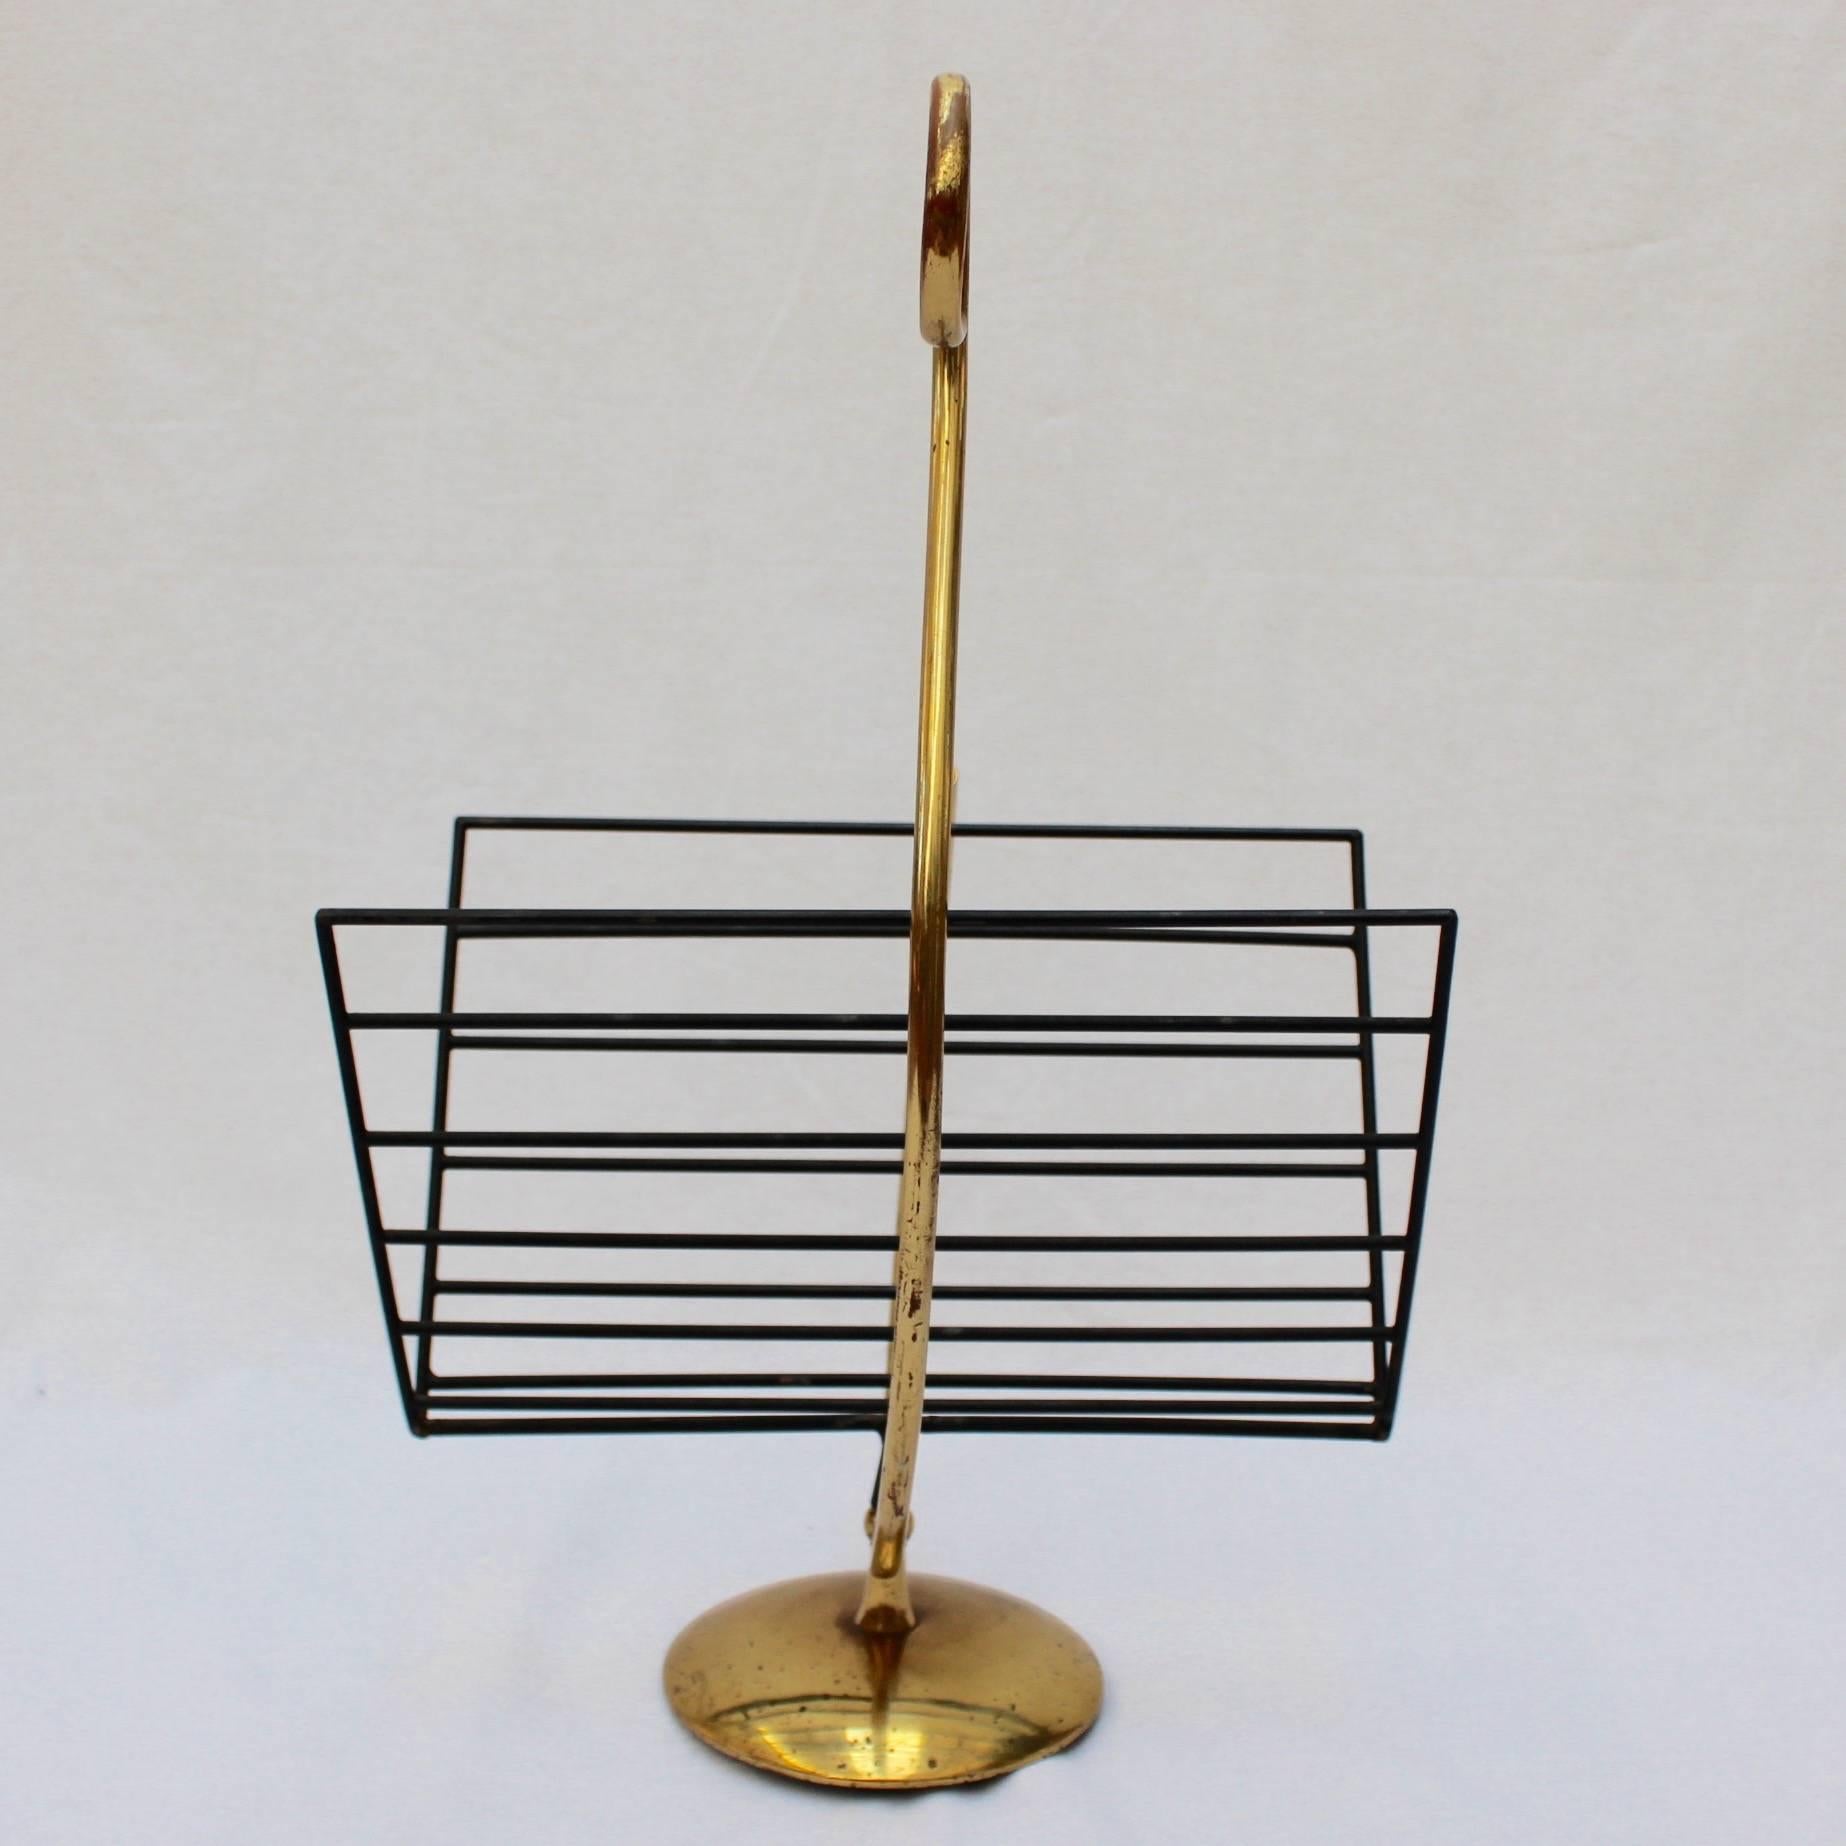 Music Note-Shaped Italian Brass Magazine Stand (c. 1950s) In Fair Condition For Sale In London, GB